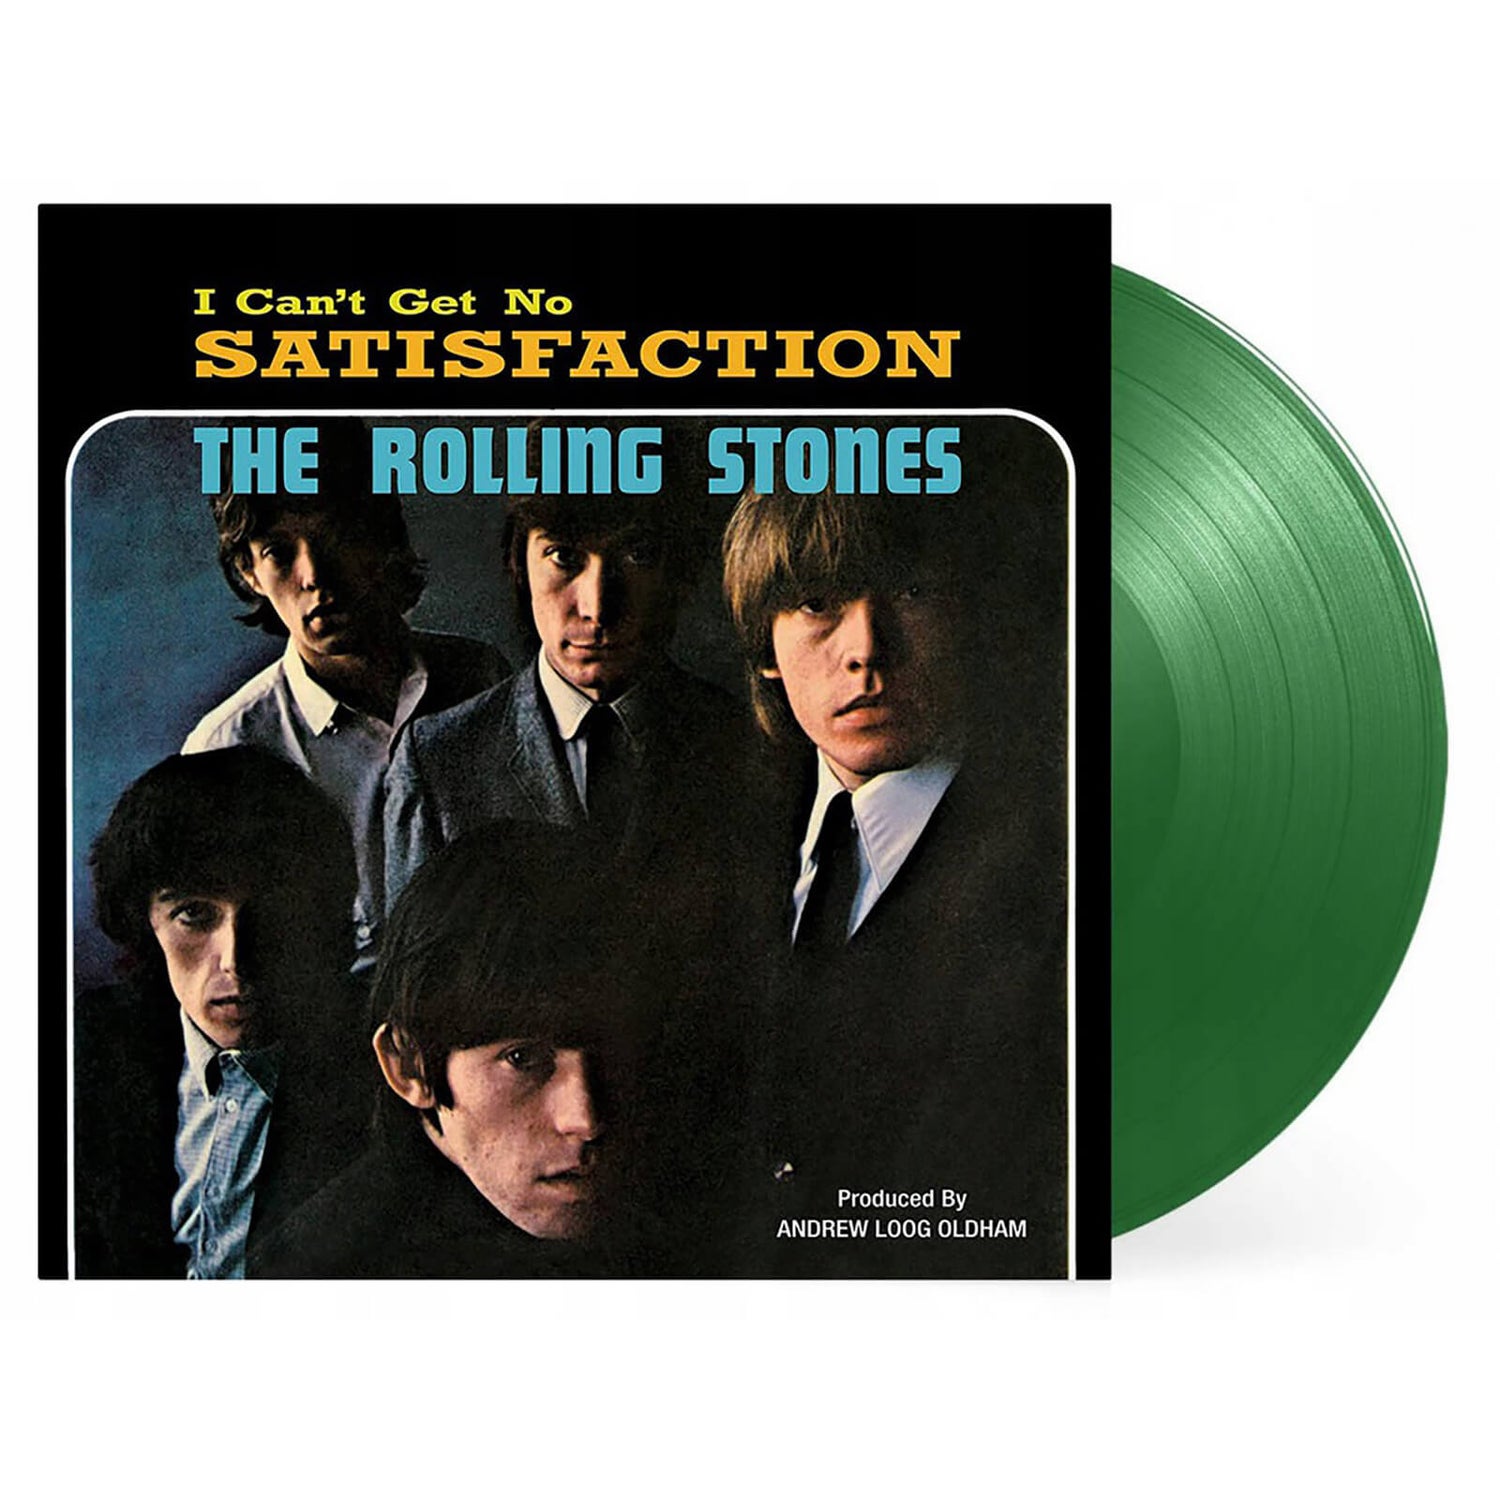 The Rolling Stones - (I Cant Get No) Satisfaction (55e Jubileum Edition) (Emerald Vinyl) 30 cm